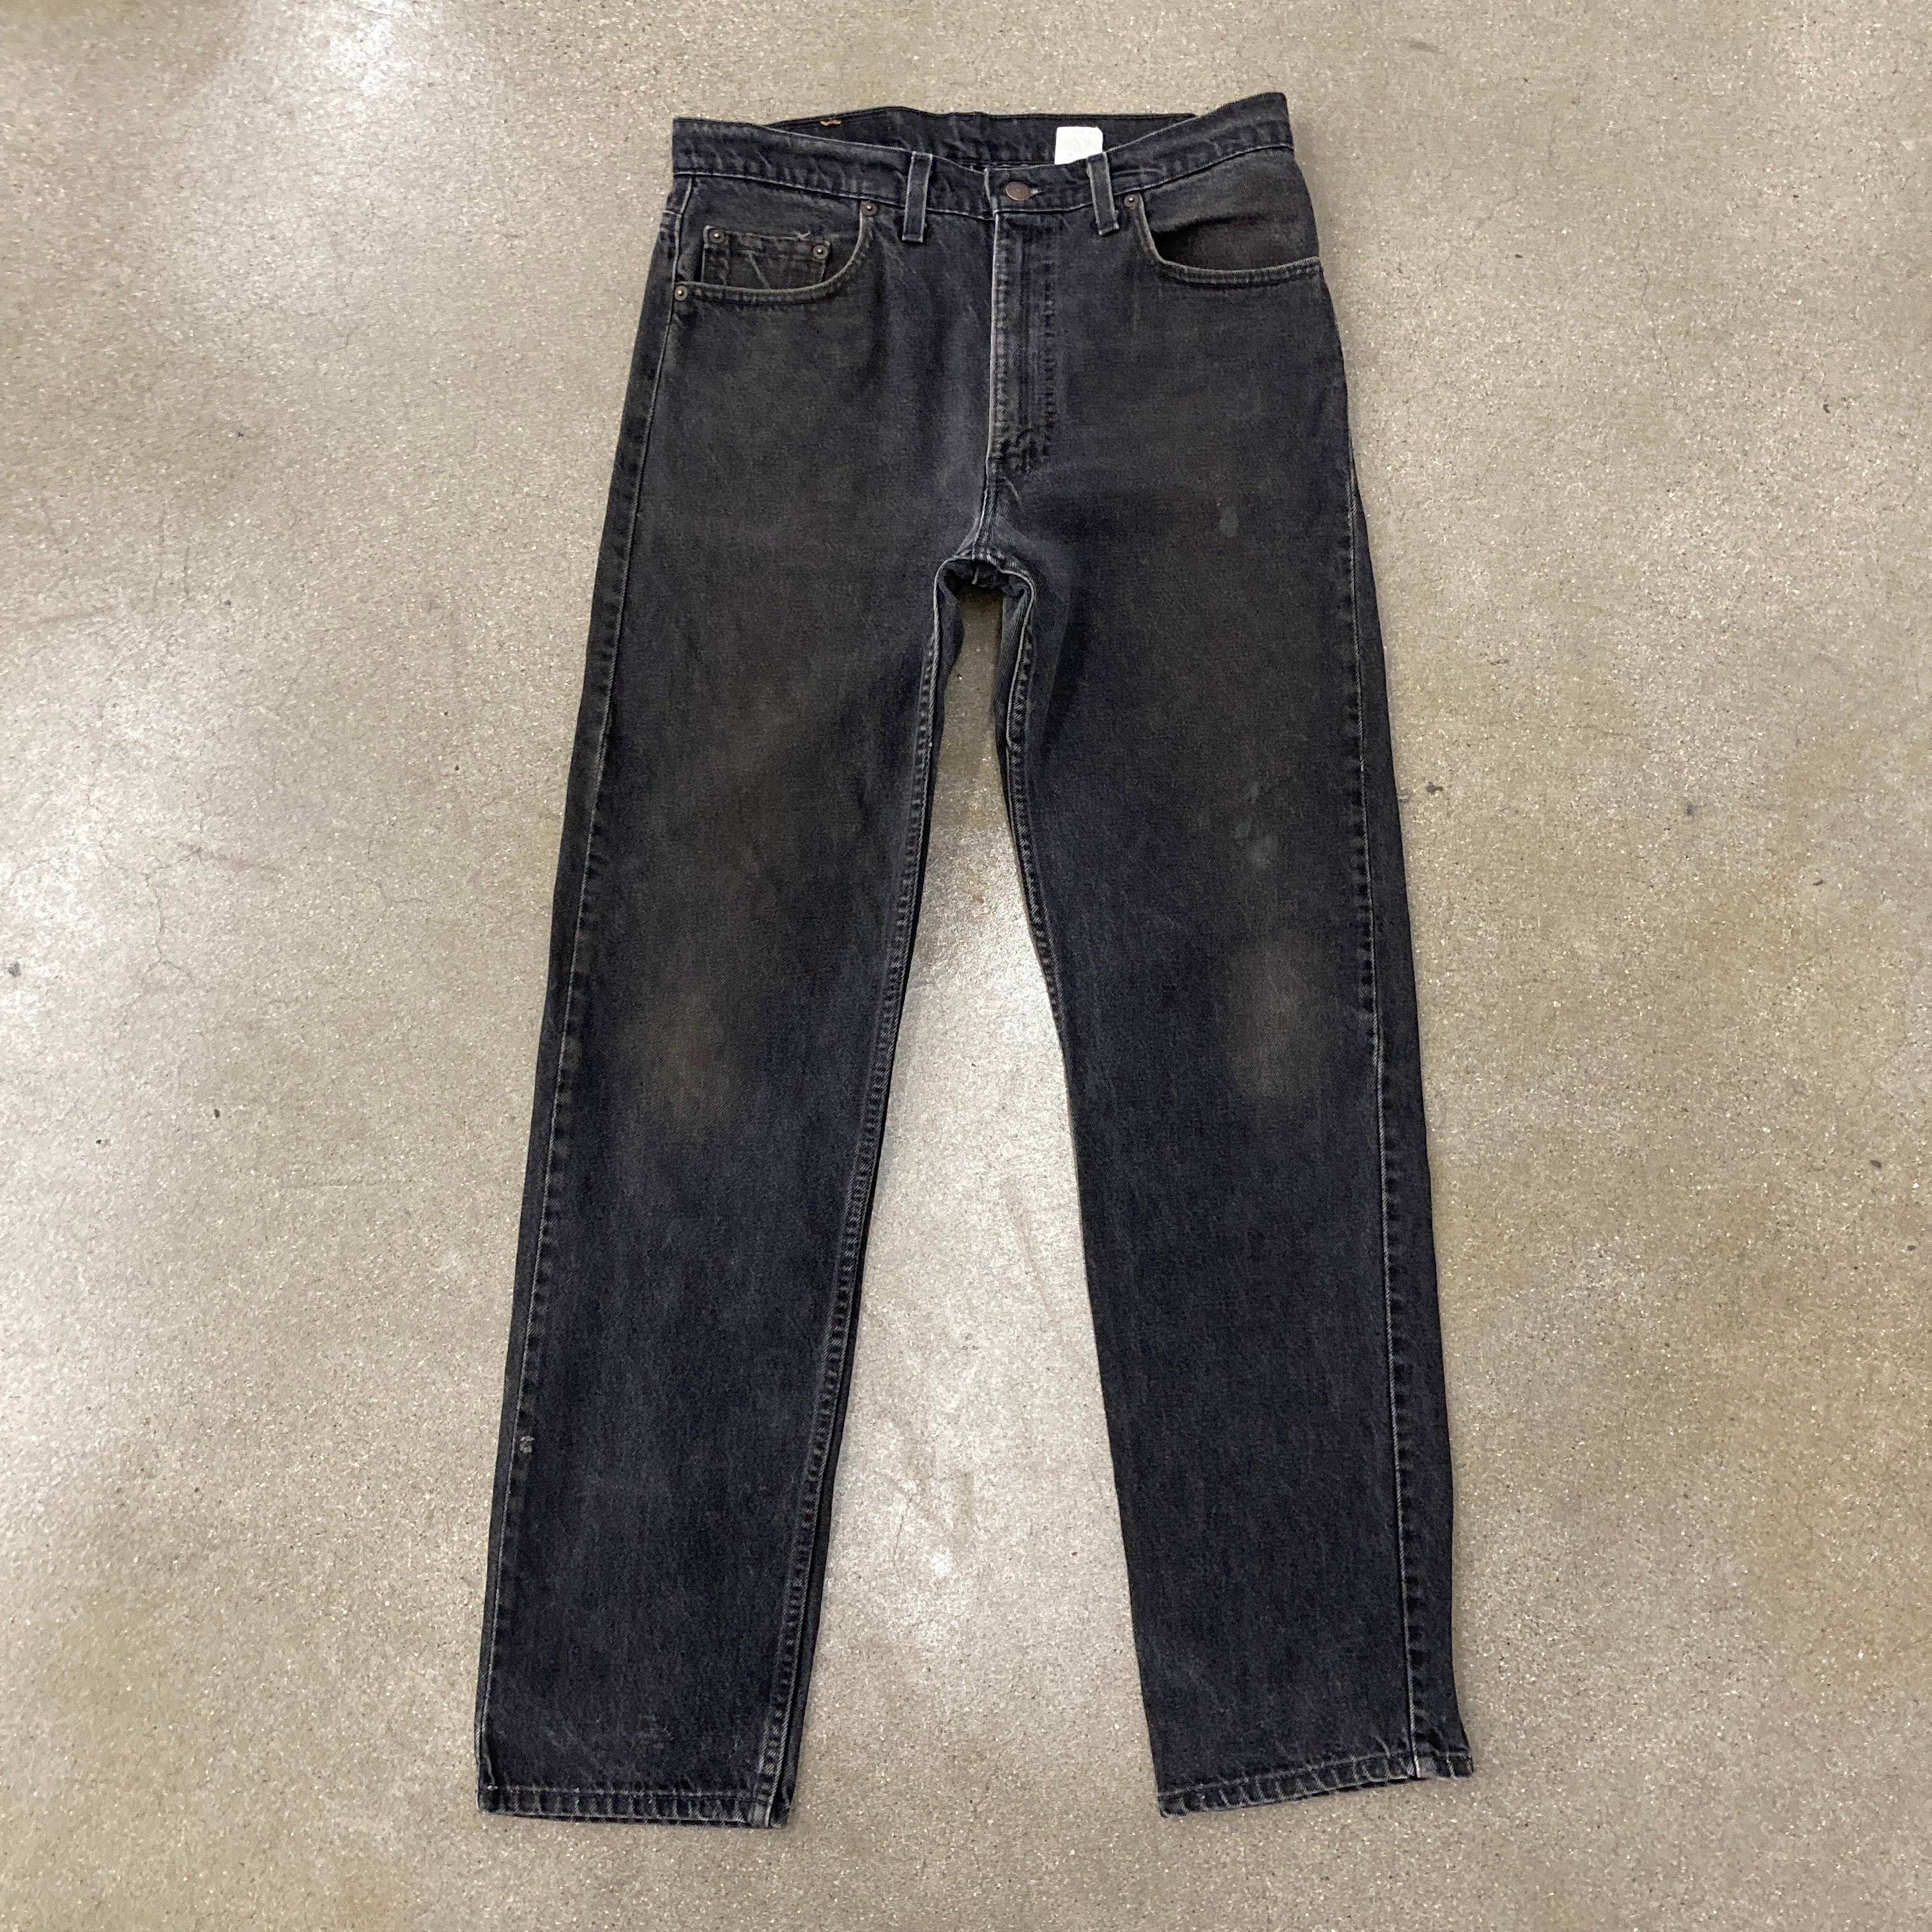 1980/90s 32x32 Levi's 505 Faded Black Jeans